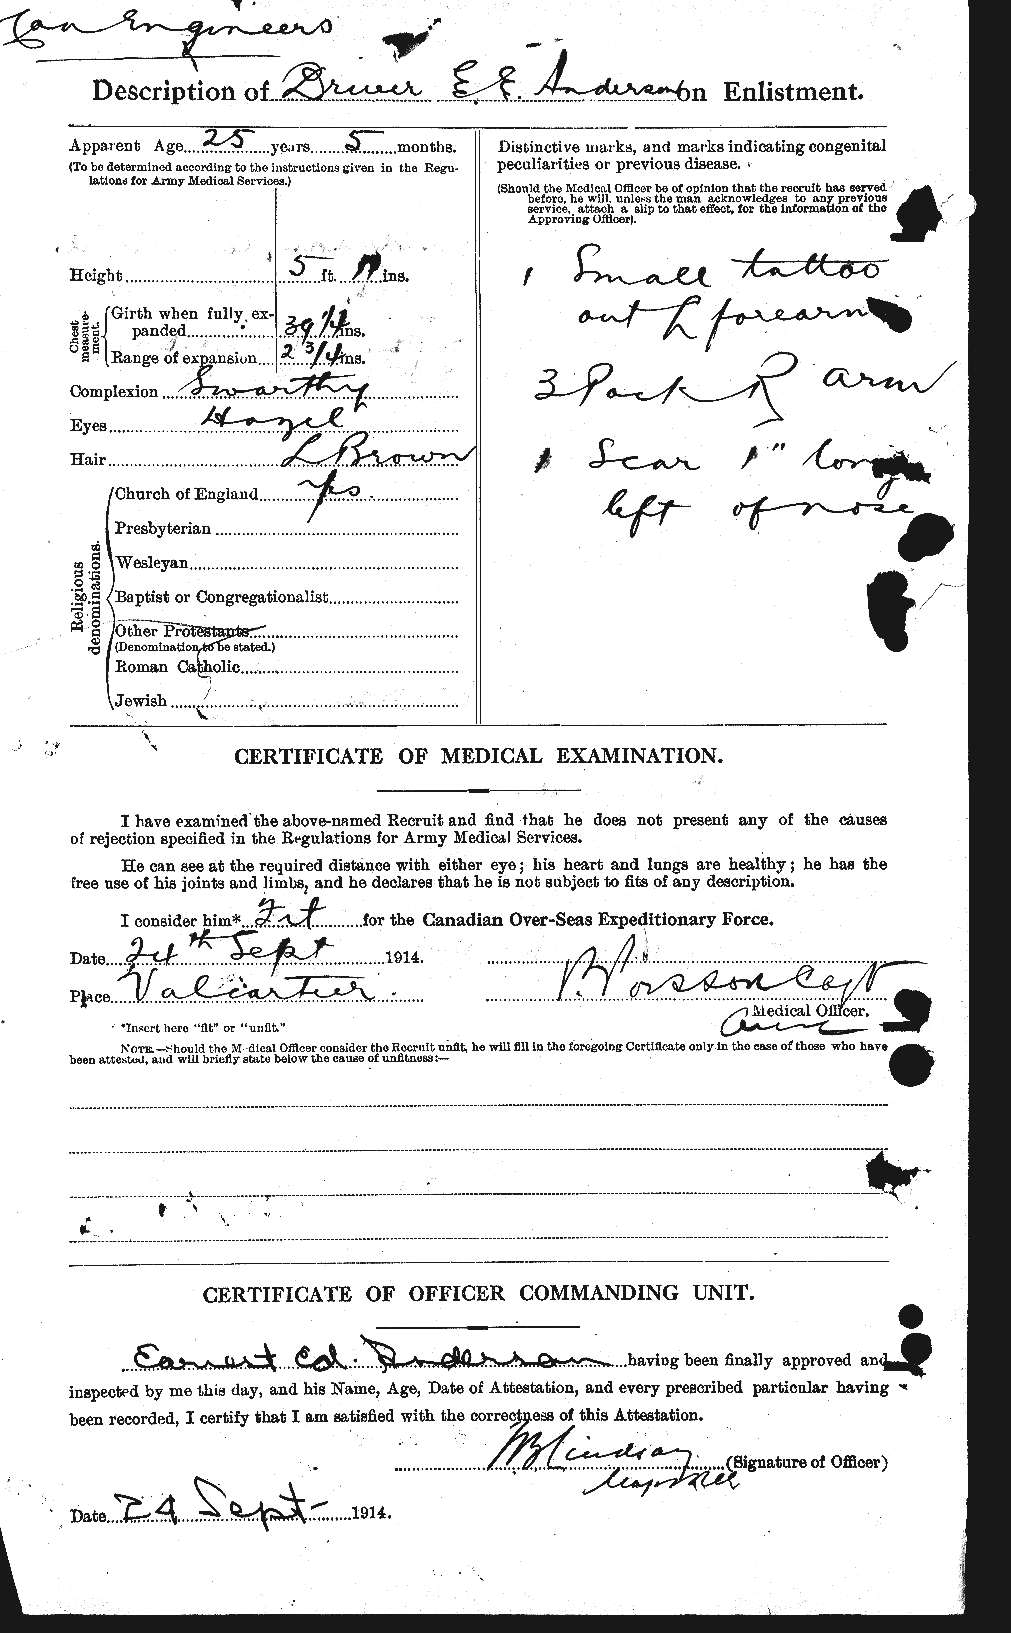 Personnel Records of the First World War - CEF 209887b